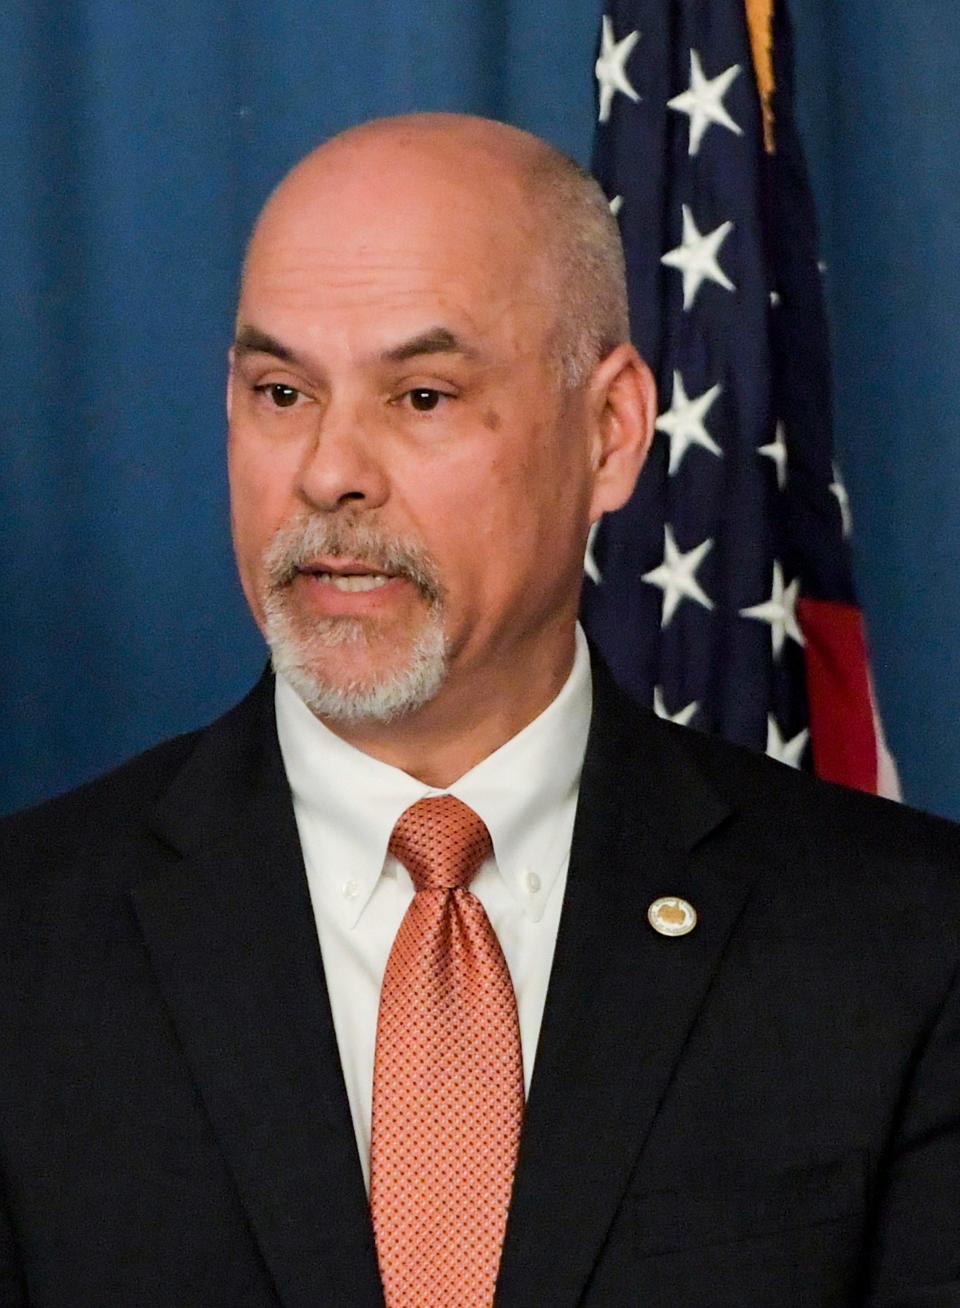 Alabama Department of Corrections Commissioner John Hamm discusses Correctional Incentive Time during a press briefing at the state Capitol in Montgomery, Alabama, on Jan. 9, 2023.